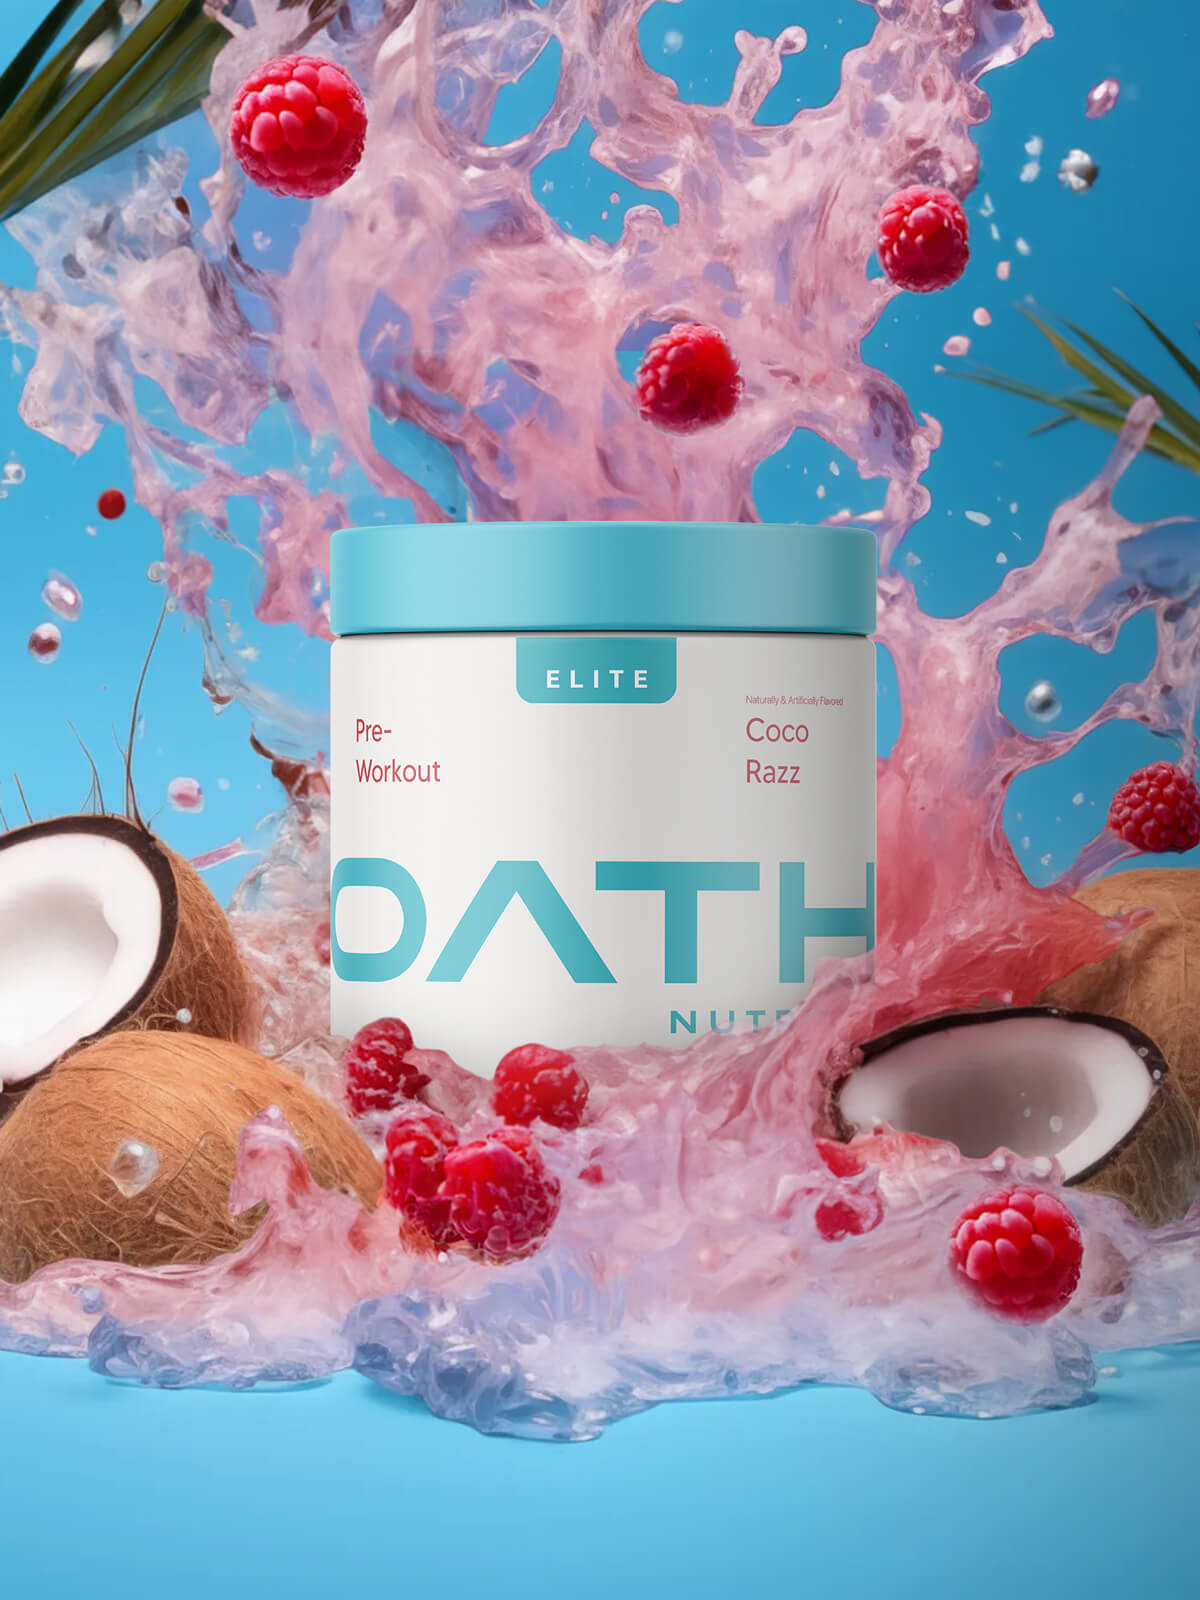 Oath Elite Pre-Workout - Coco Razz container with raspberries and coconuts bursting around it. 